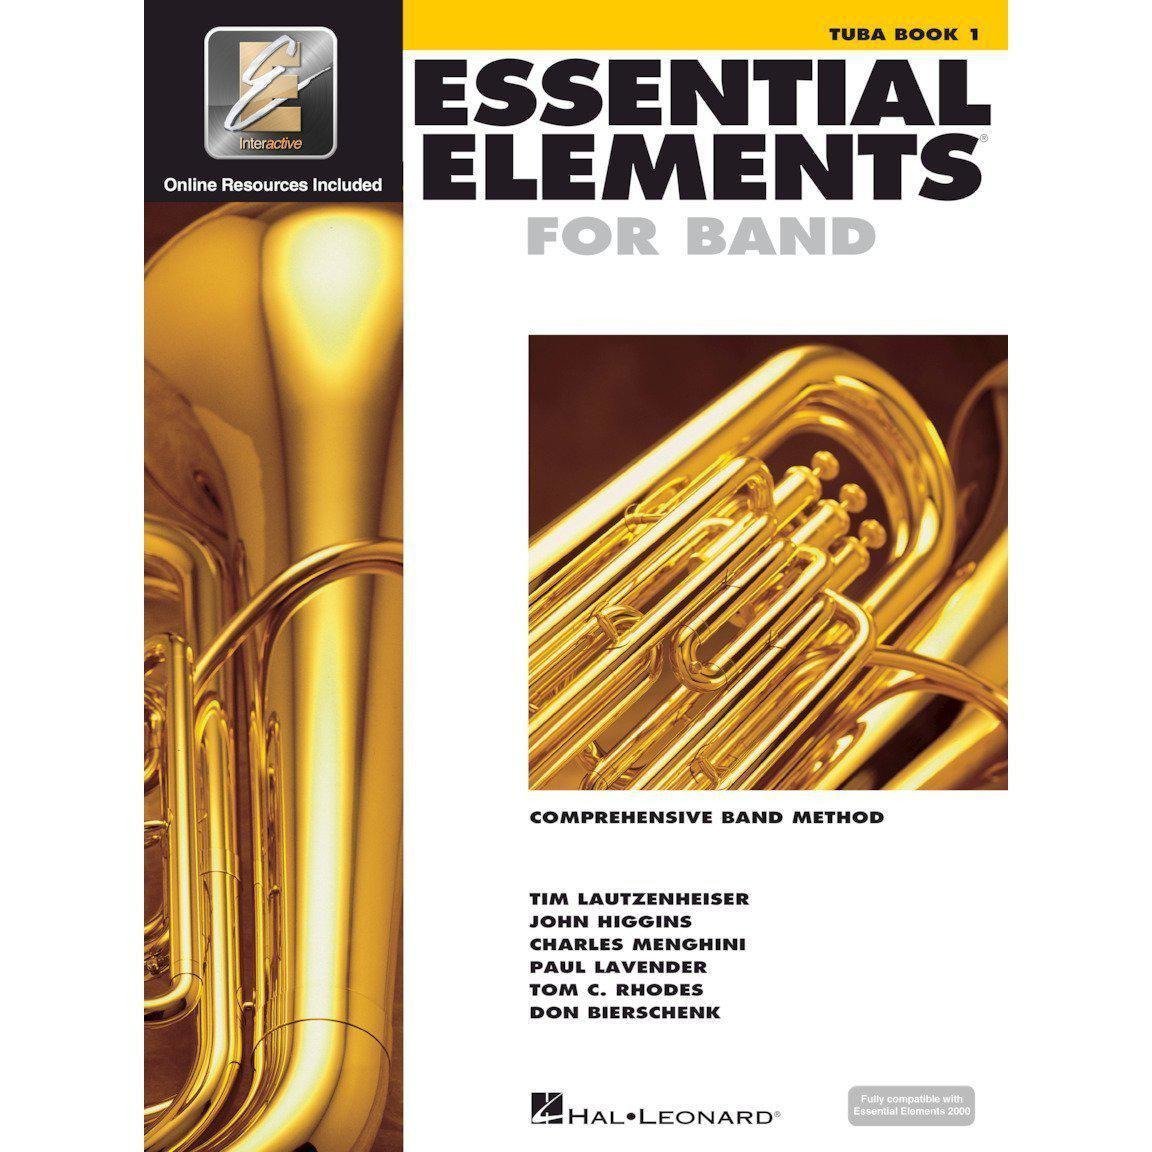 Essential Elements for Band Book 1-Tuba-Andy's Music